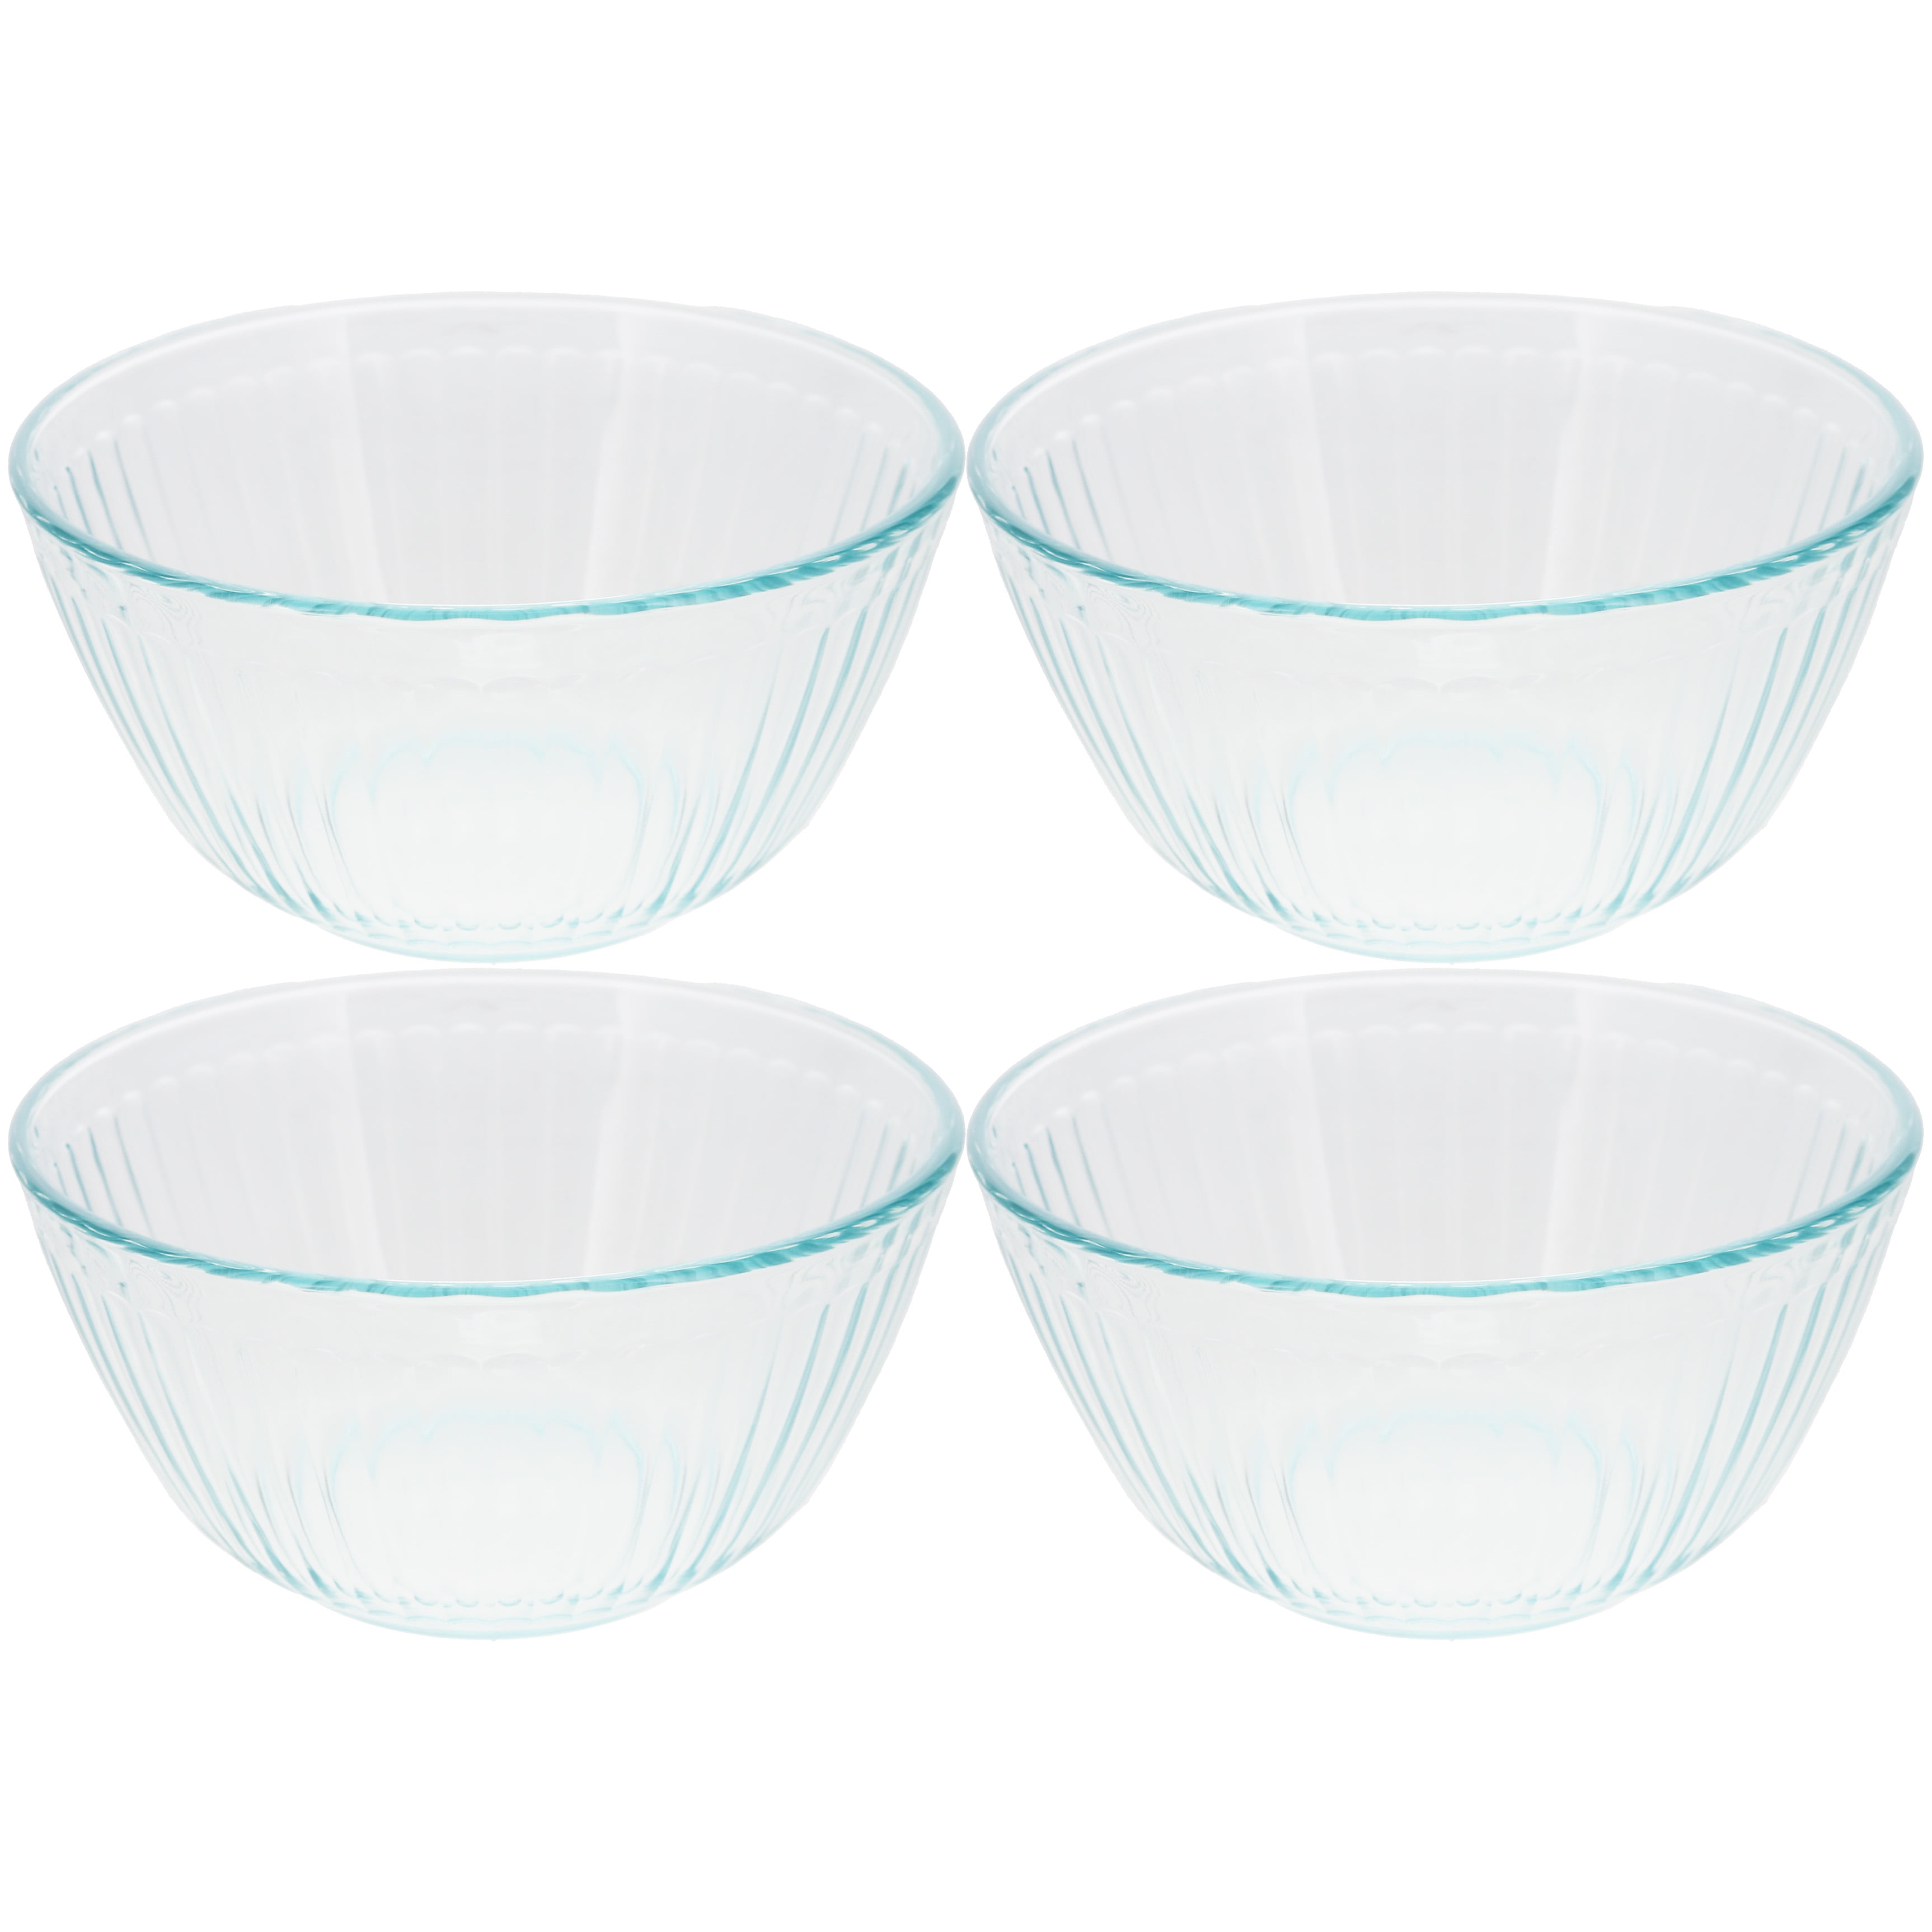 Pyrex 7402 6-Cup Sculpted Glass Mixing Bowls (4-Pack)